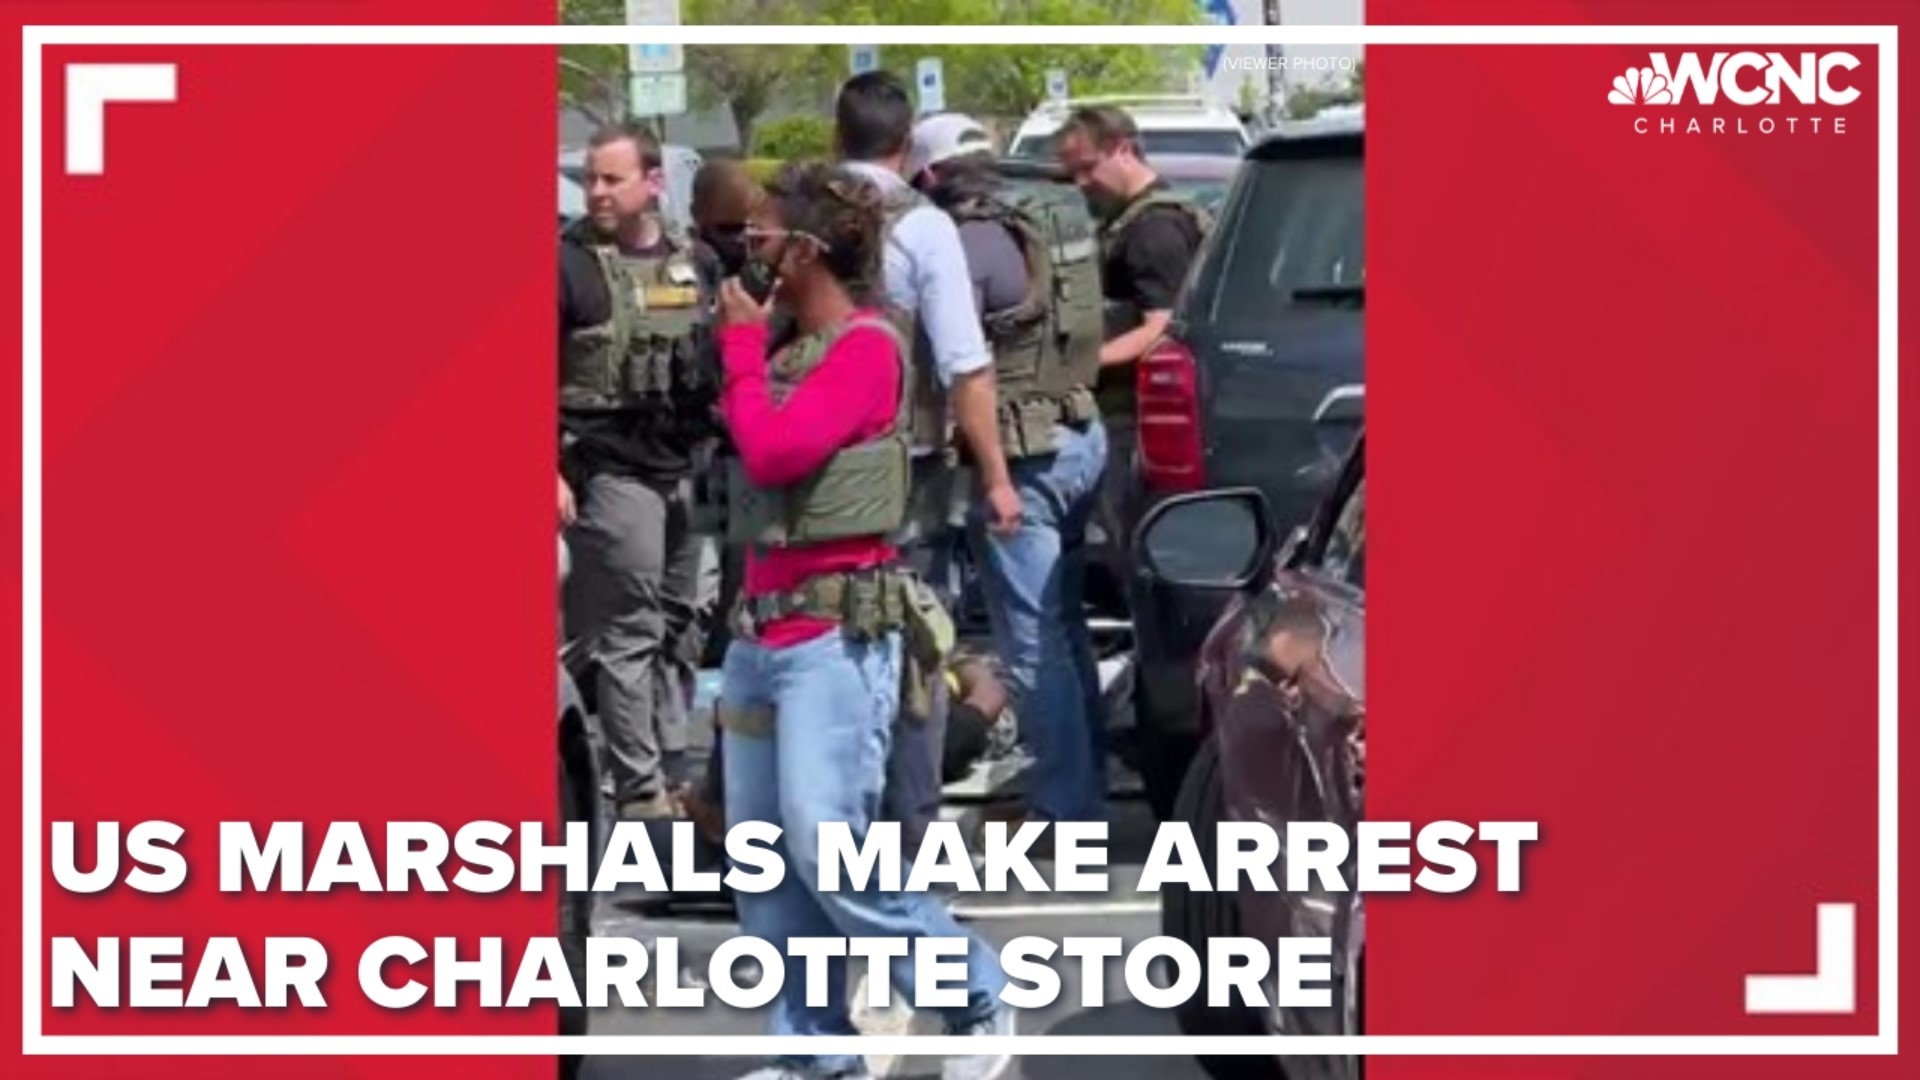 A WCNC Charlotte viewer was at a shopping center in University City Tuesday when federal agents surrounded an SUV outside a Ross department store.